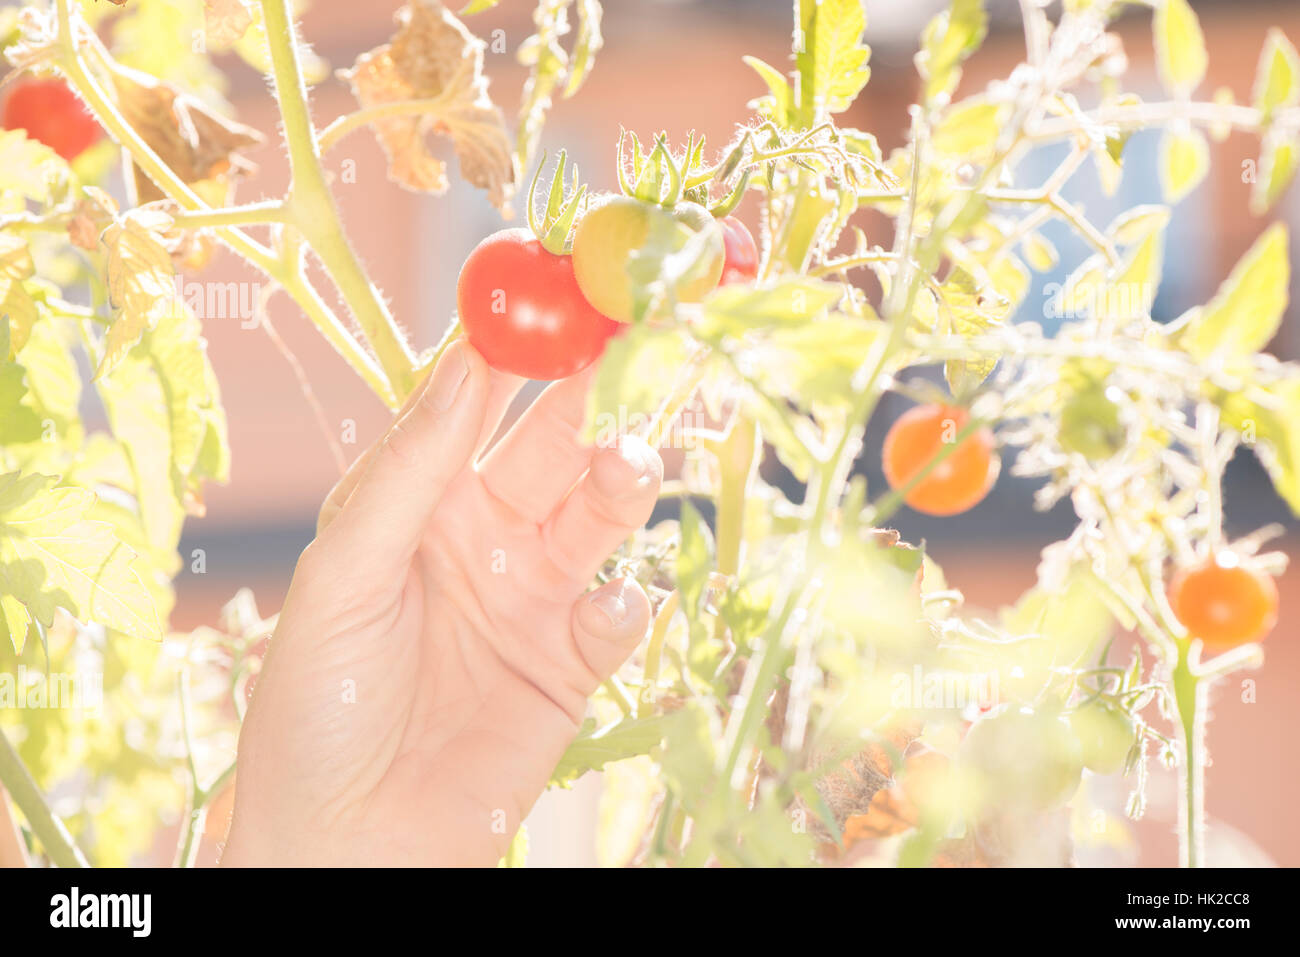 Hand holding tomato. Taking care of plants and vegetables on balcony. Concept of green lifestyle and urban garden. Stock Photo